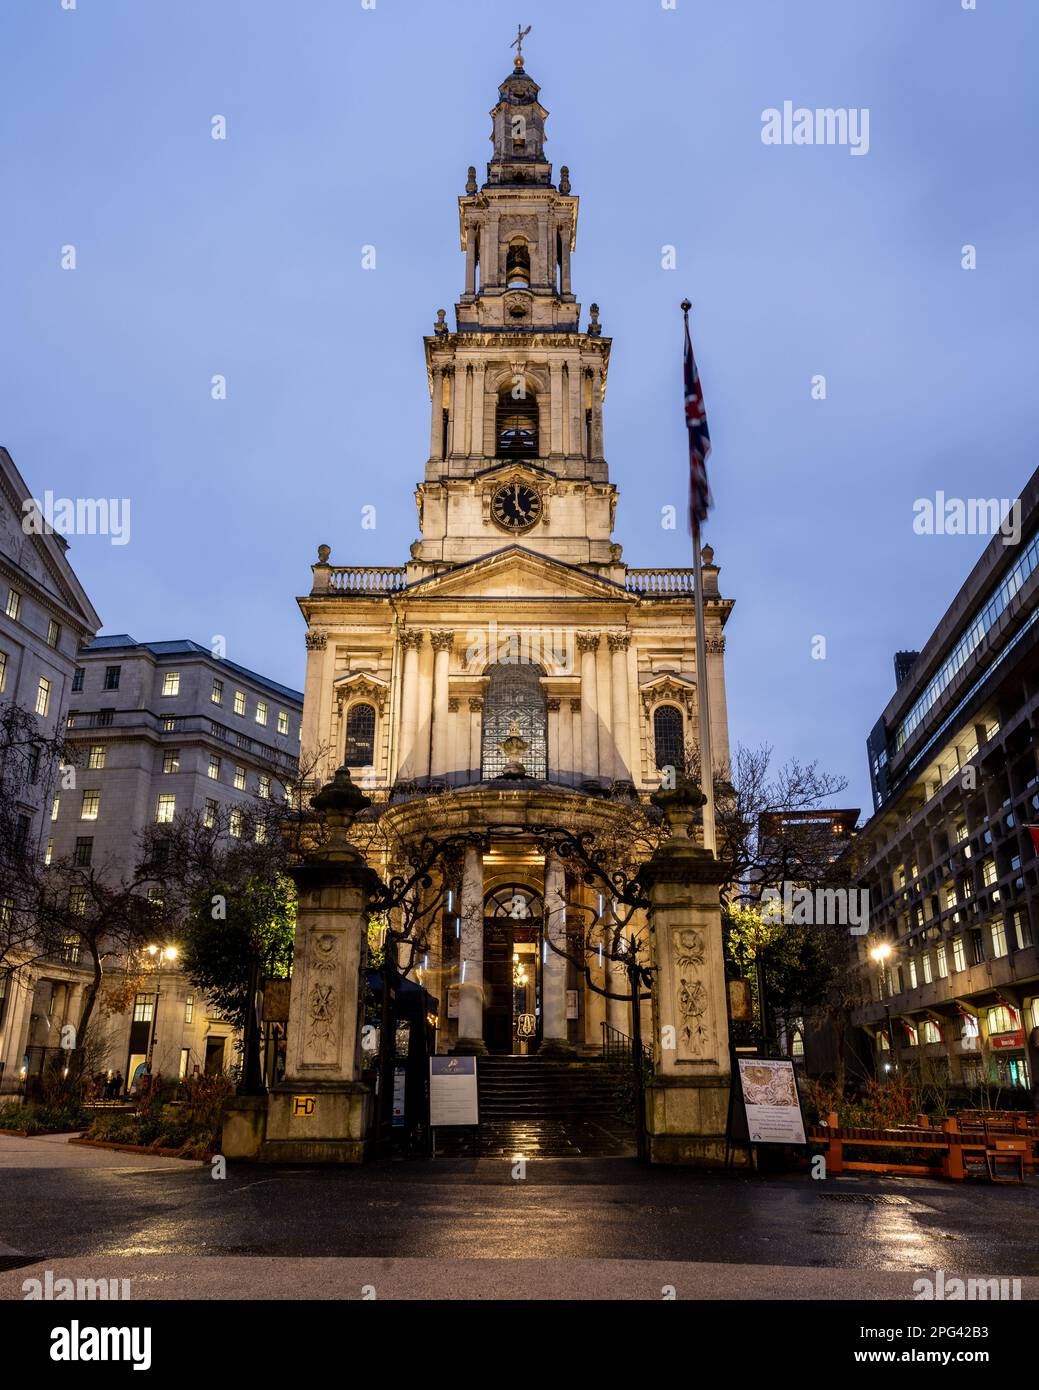 The 18th century Baroque St Mary Le Strand Church in central London. Stock Photo